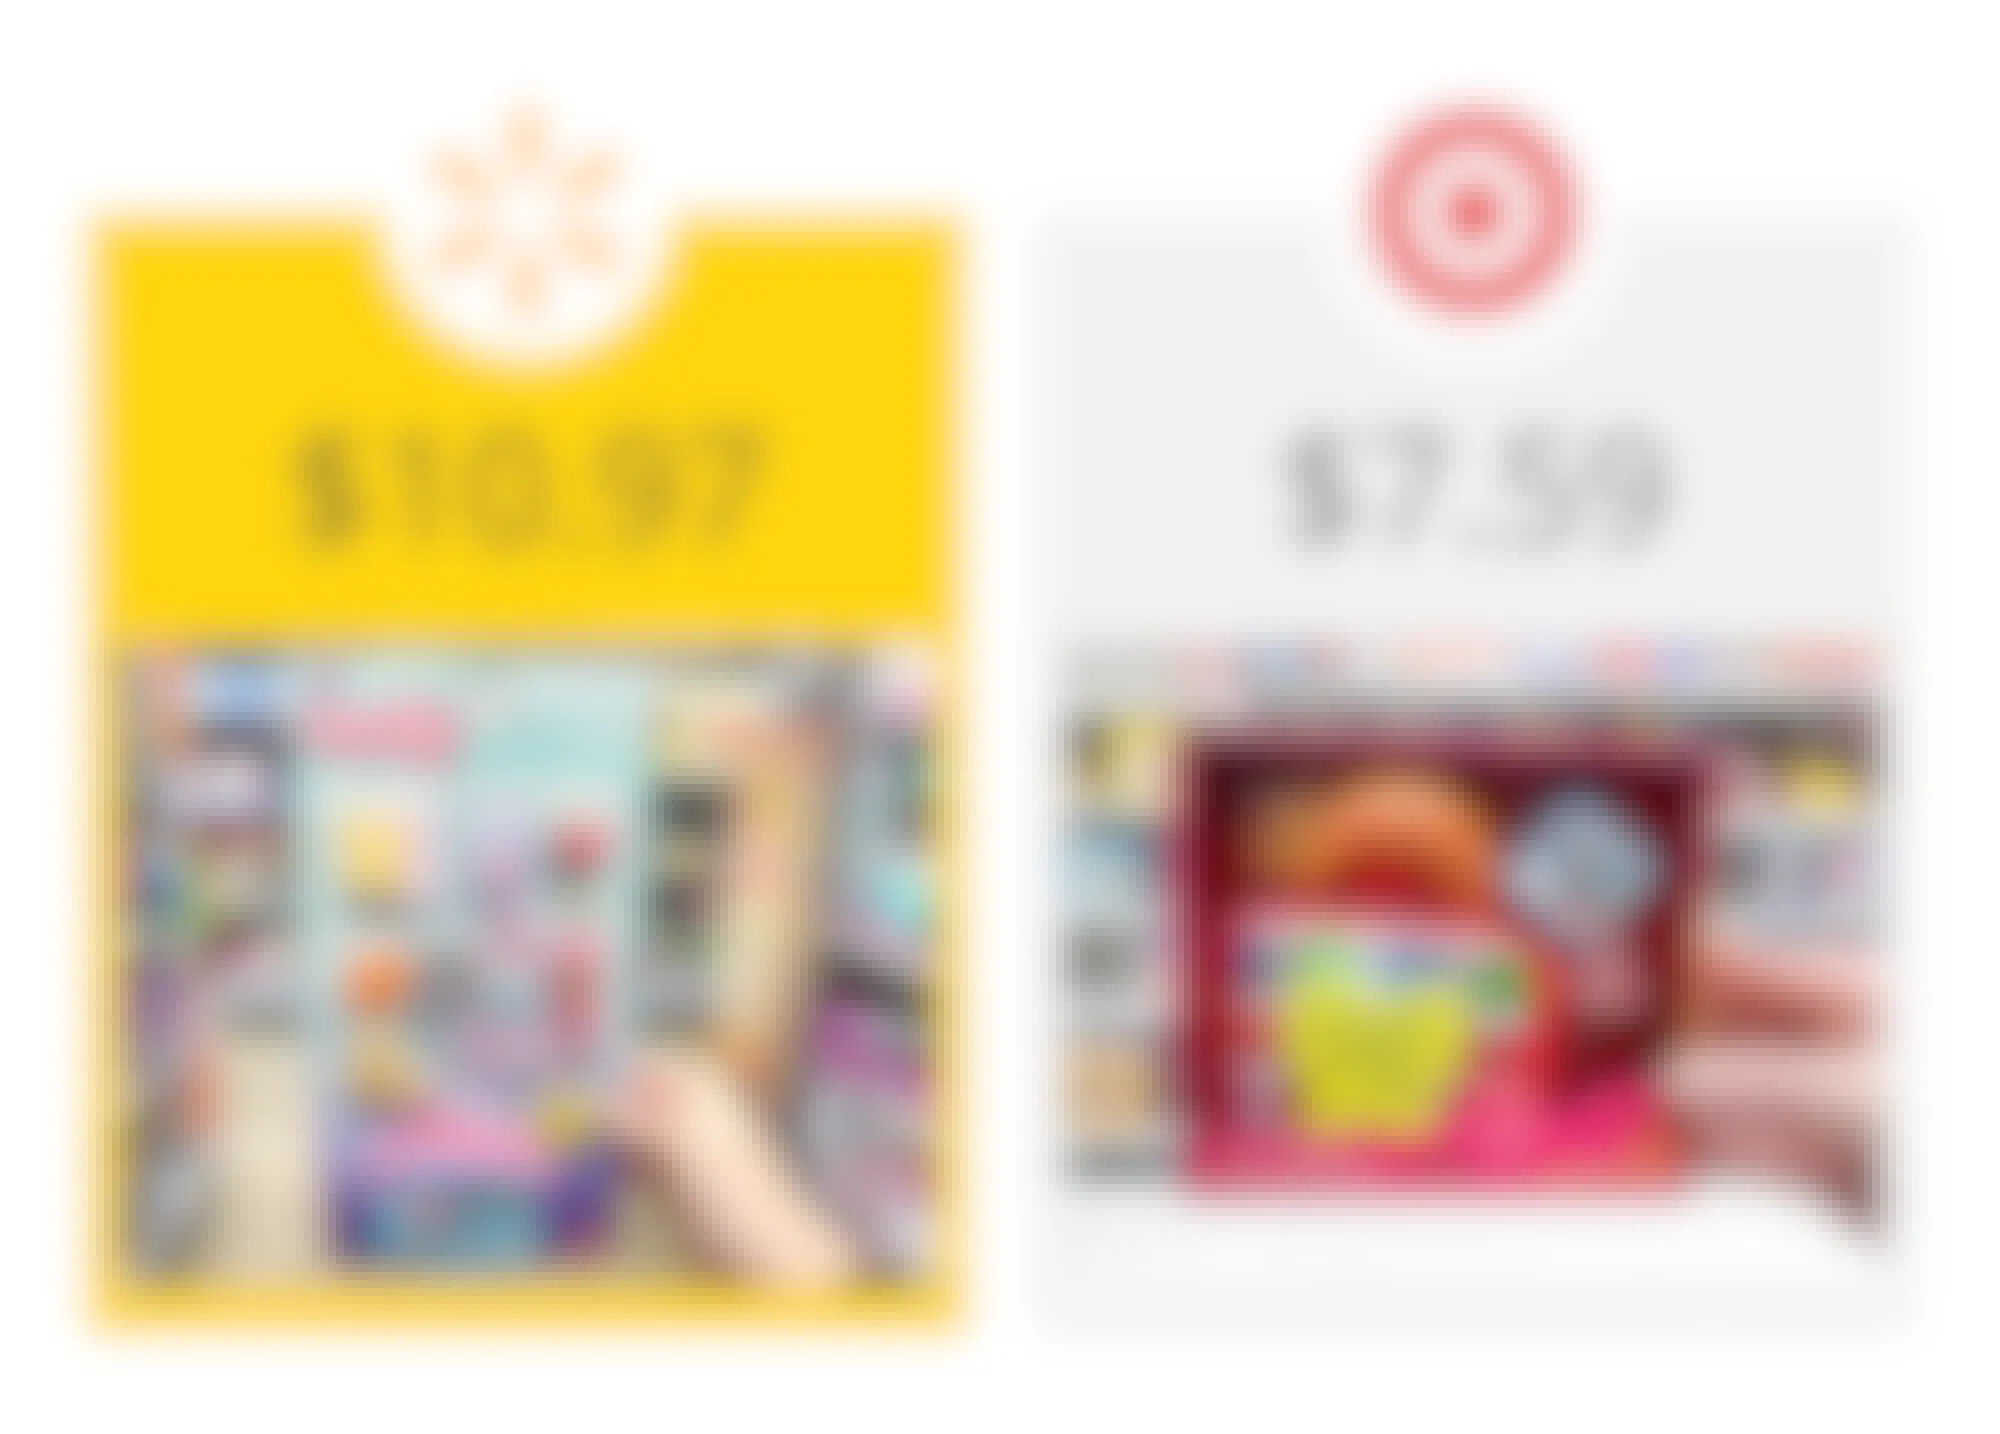 walmart as the winner on a graphic showing price comparison between target's our generation and walmart's my life as doll lunch sets